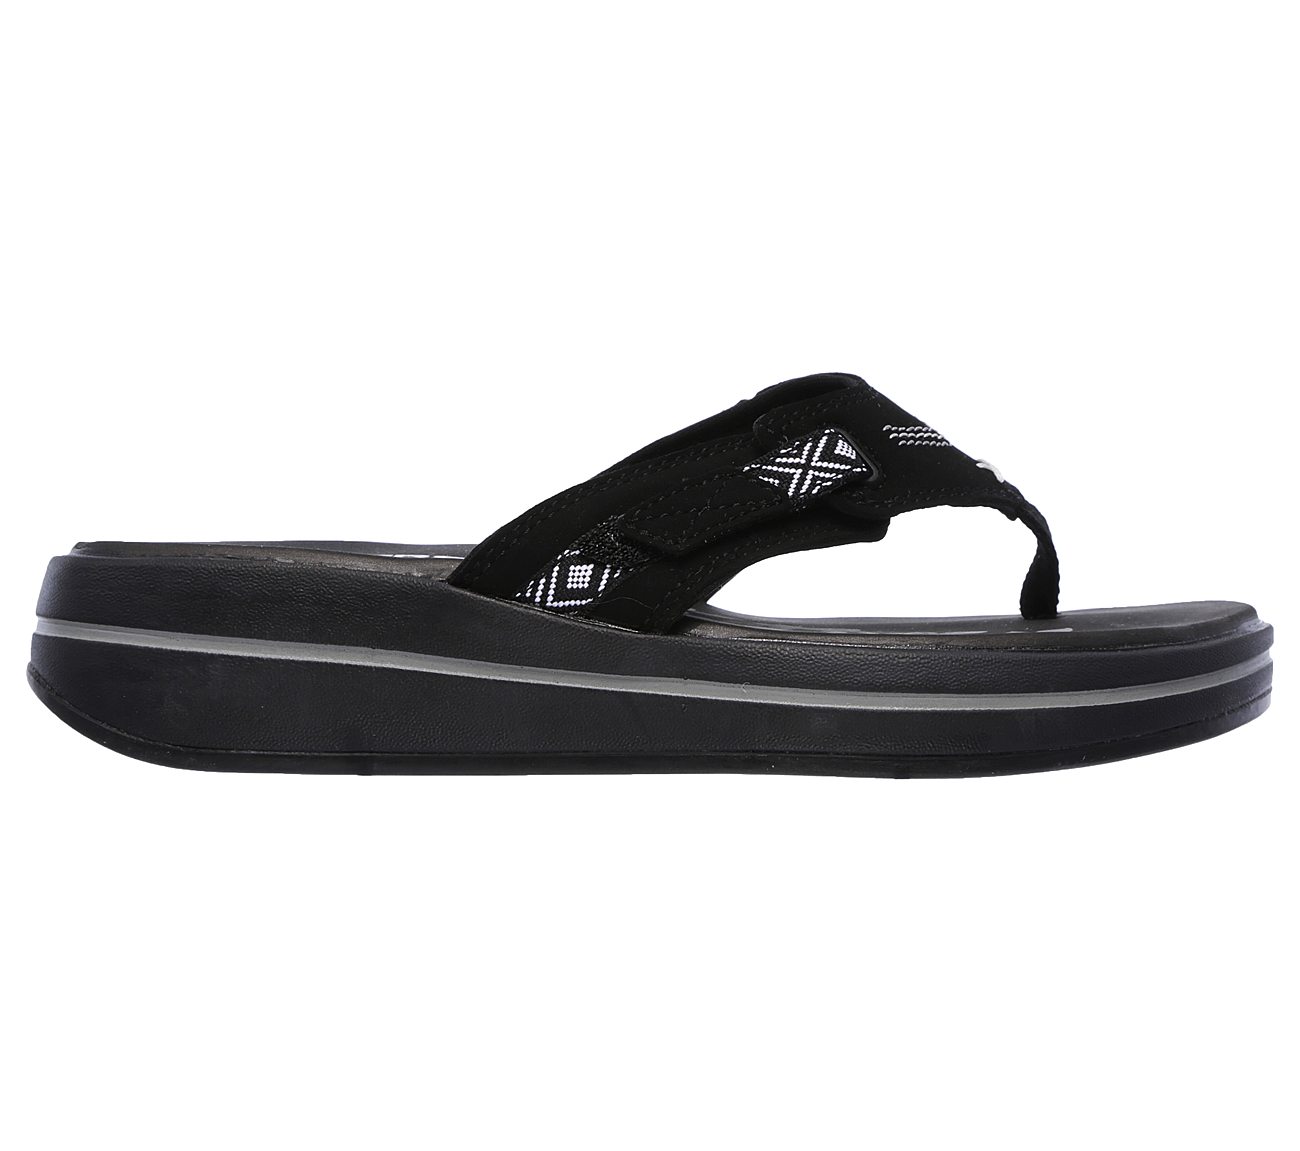 skechers relaxed fit slip on sandals